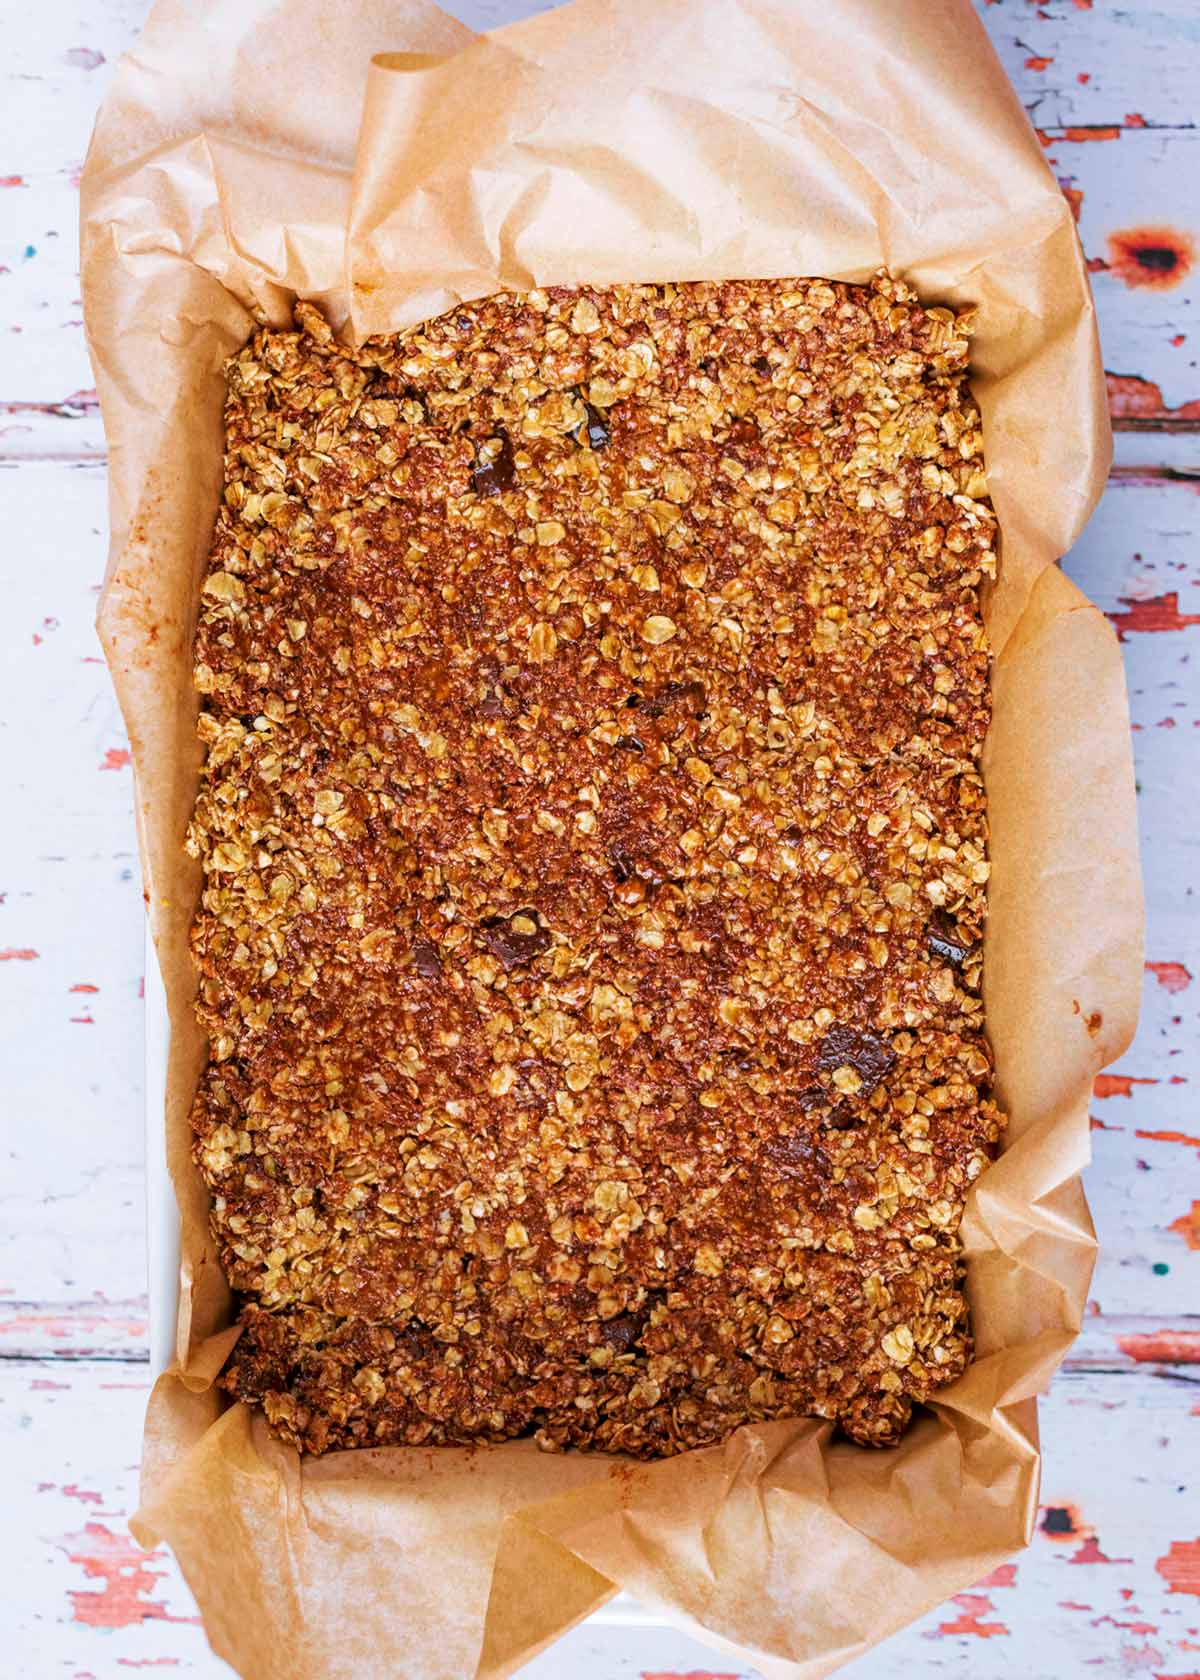 A lined baking dish with an oat and chocolate mix pressed into it.